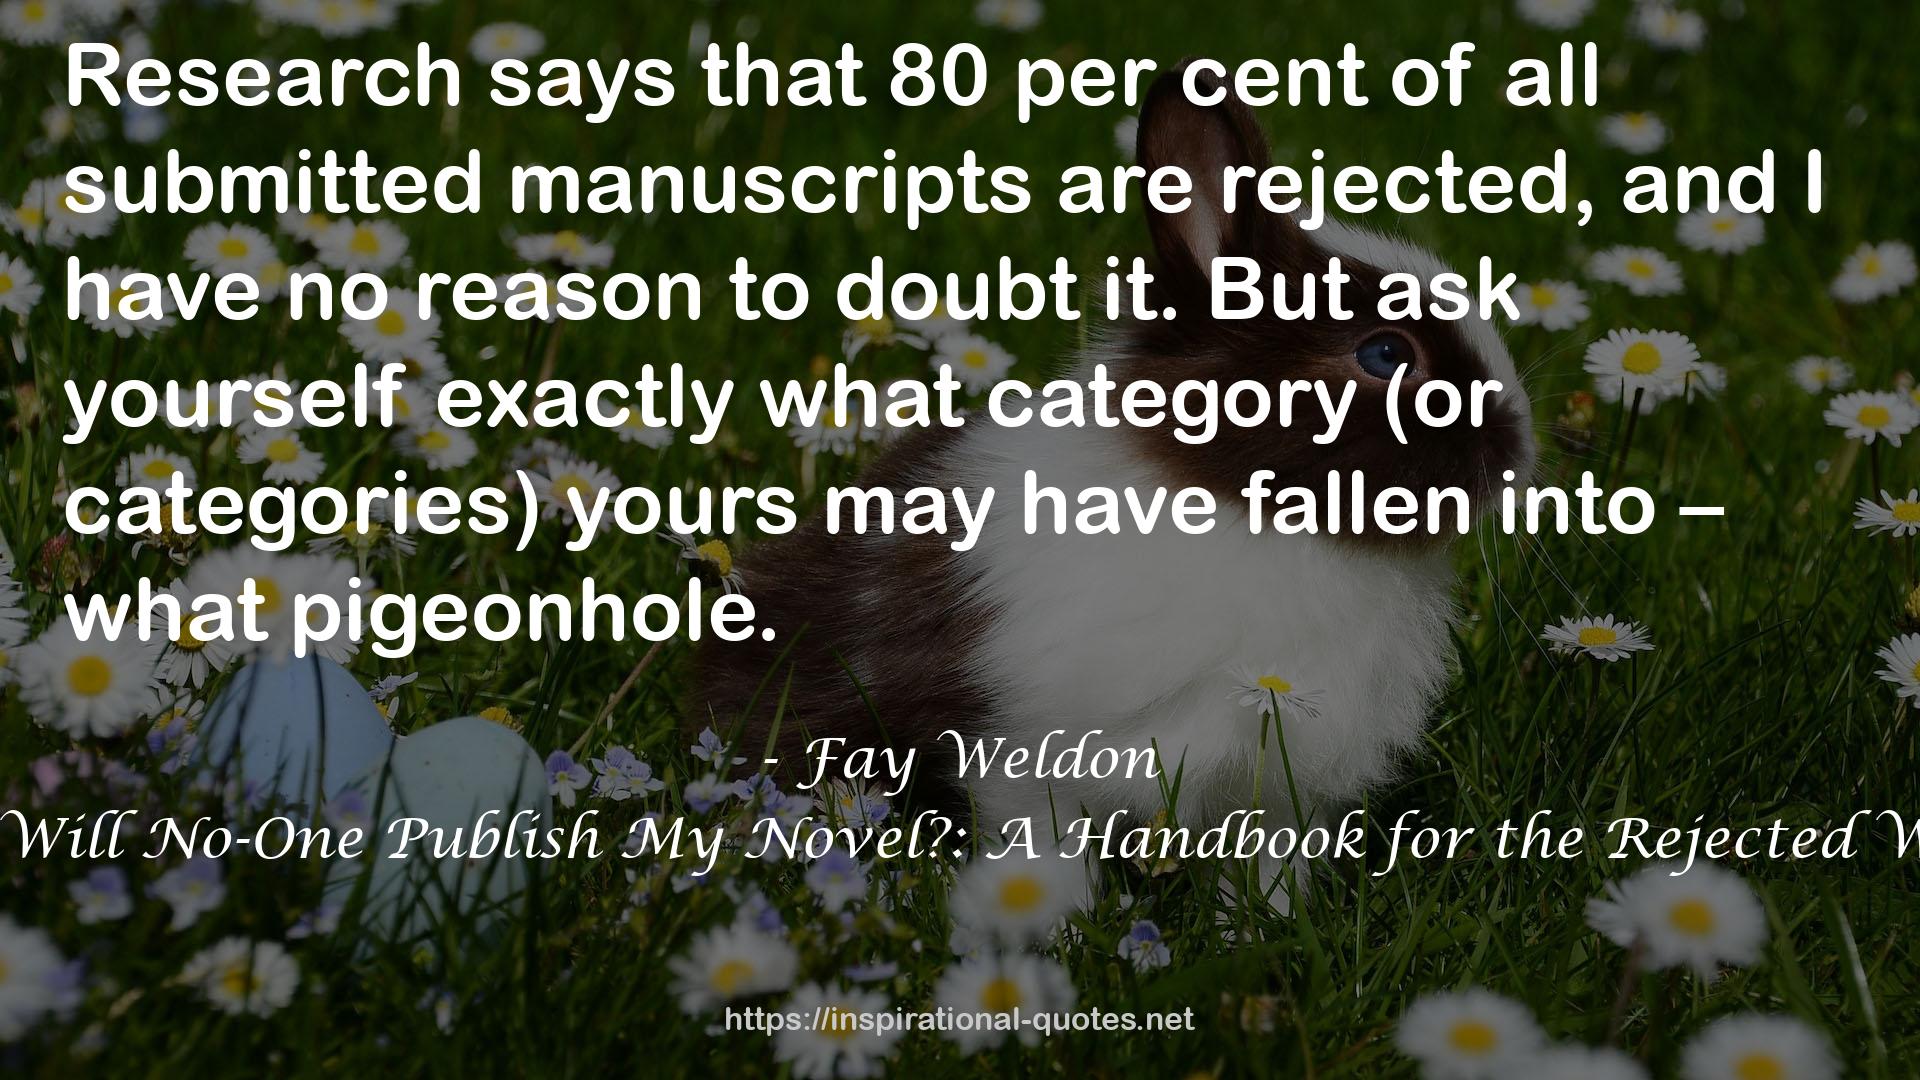 Why Will No-One Publish My Novel?: A Handbook for the Rejected Writer QUOTES